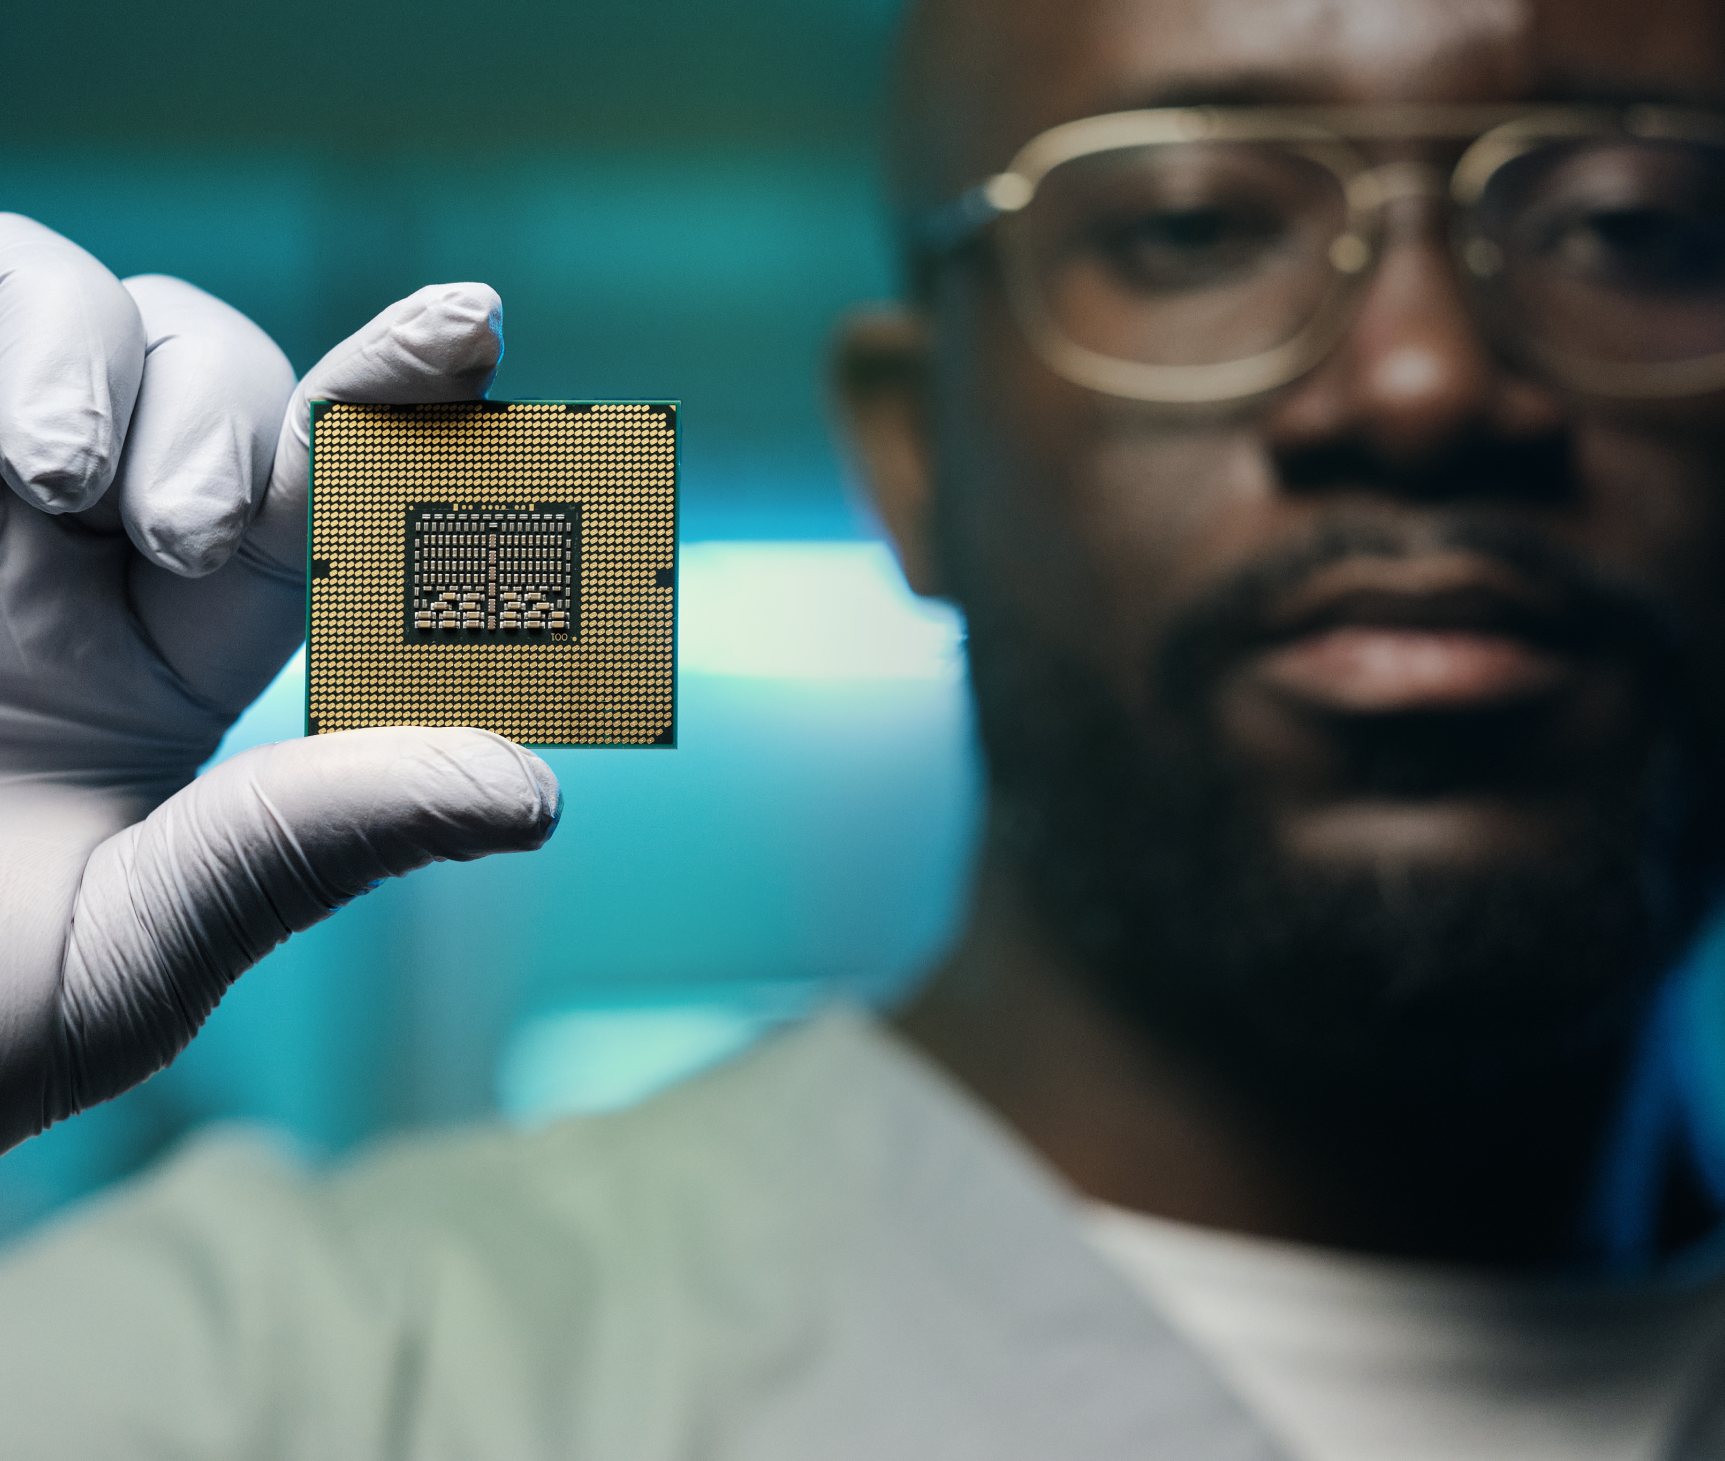 scientist holding a computer chip